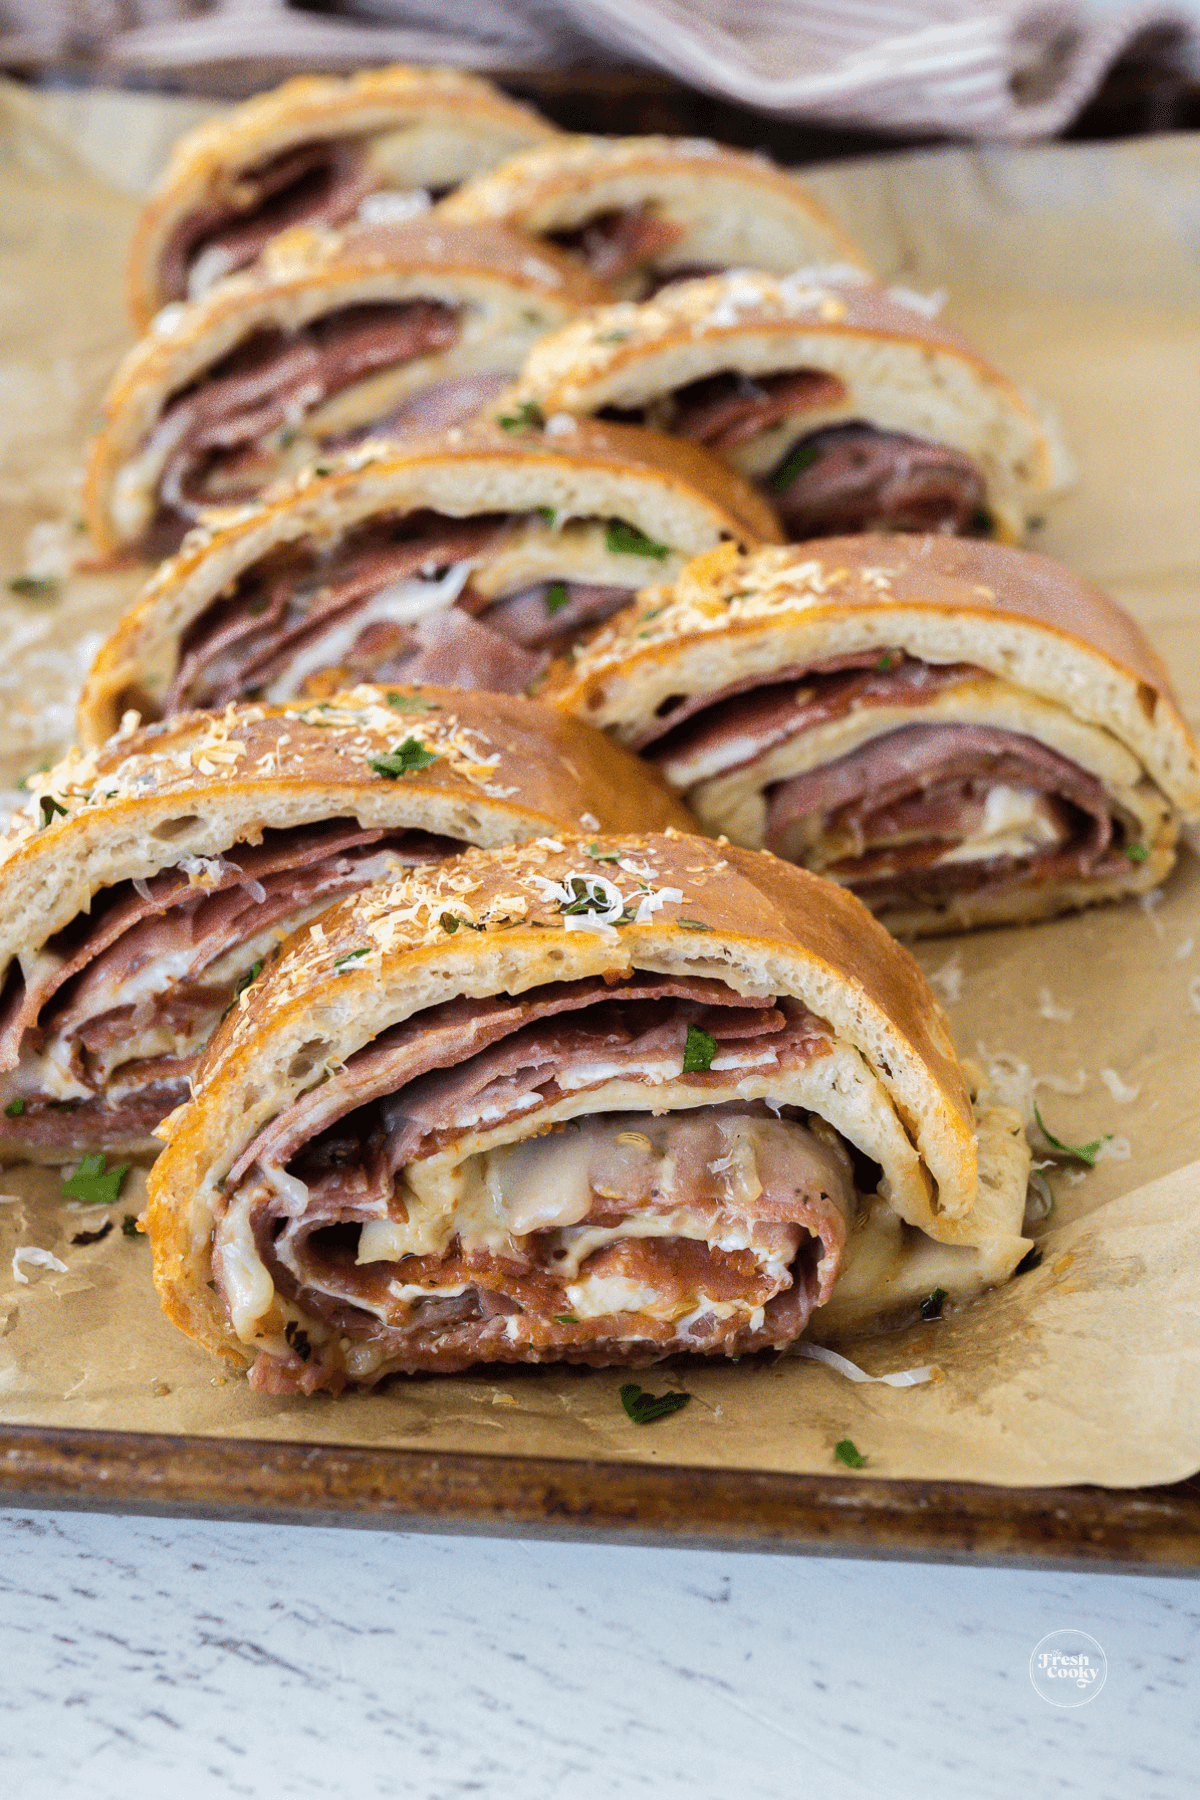 Slice stromboli into individual slices for a grab and go dinner or snack!